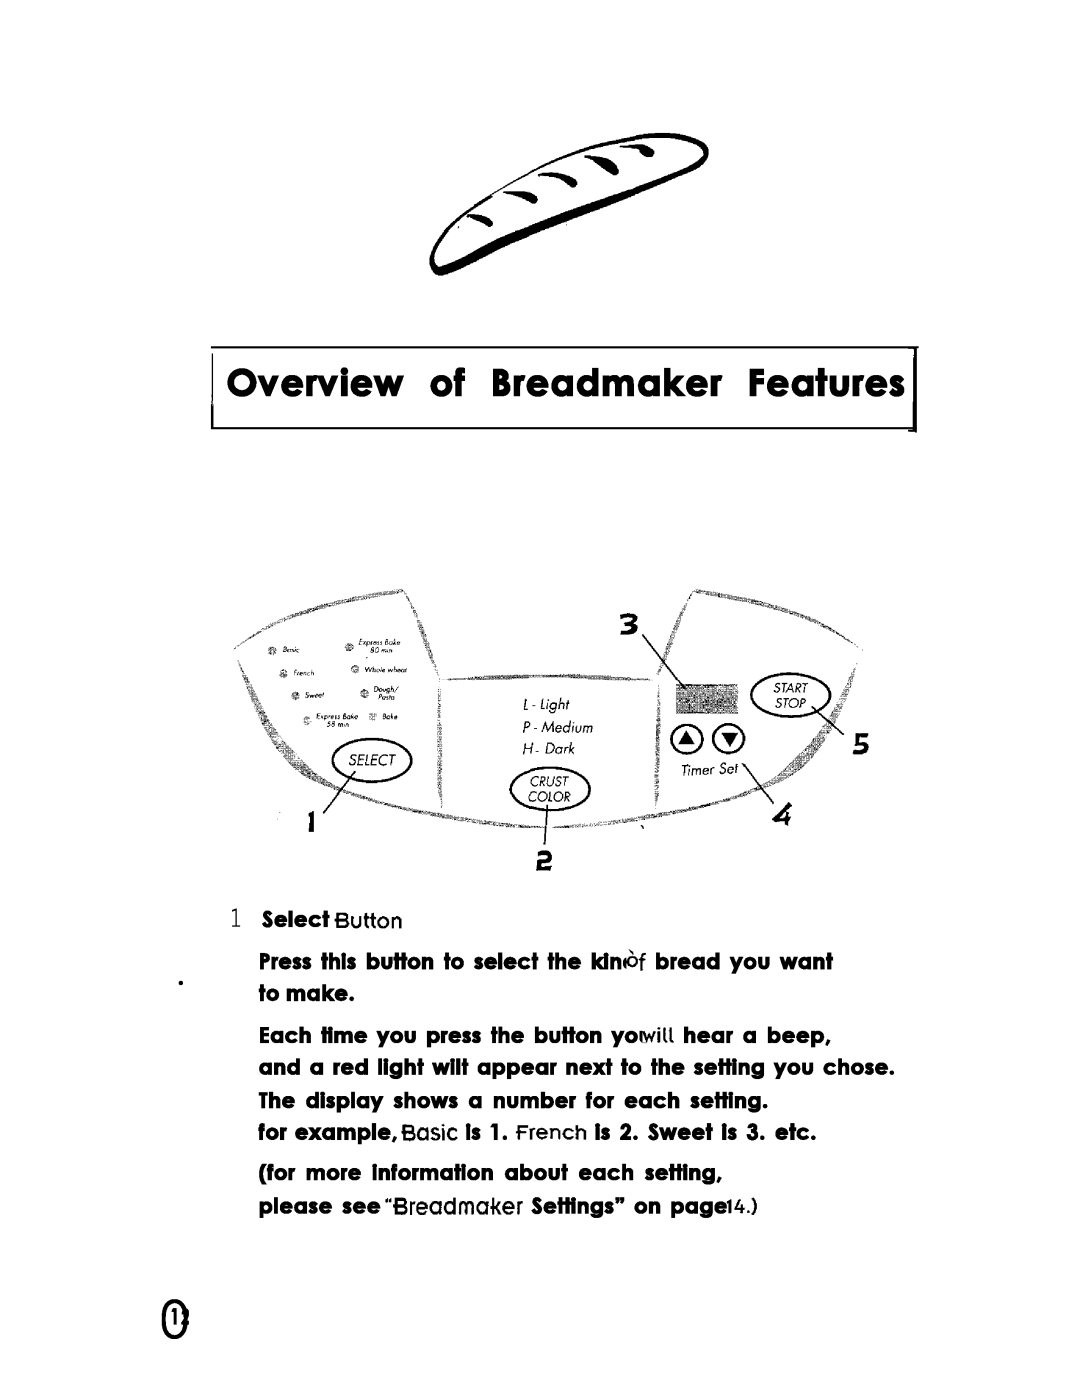 Oster Bread Maker Overview of Breadmaker Features, Select Press this button to select the kind bread you want to make 